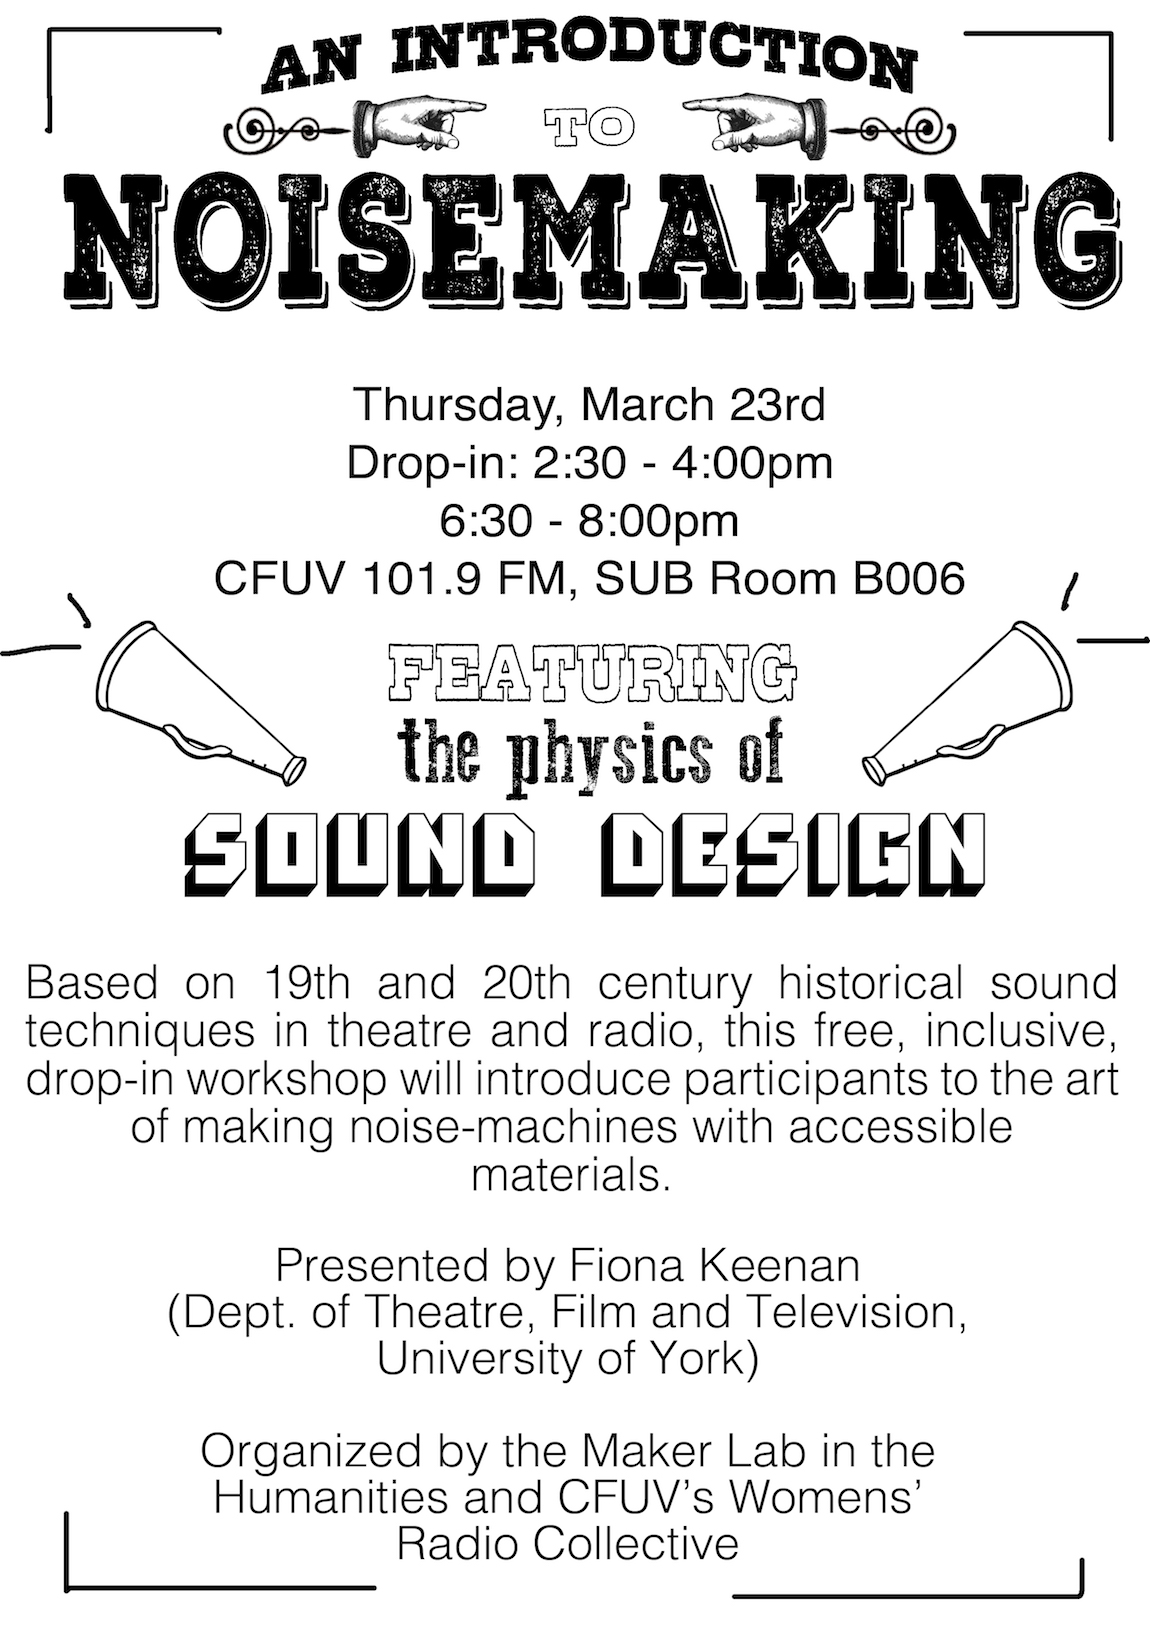 An Introduction to Noisemaking, by Fiona Keenan